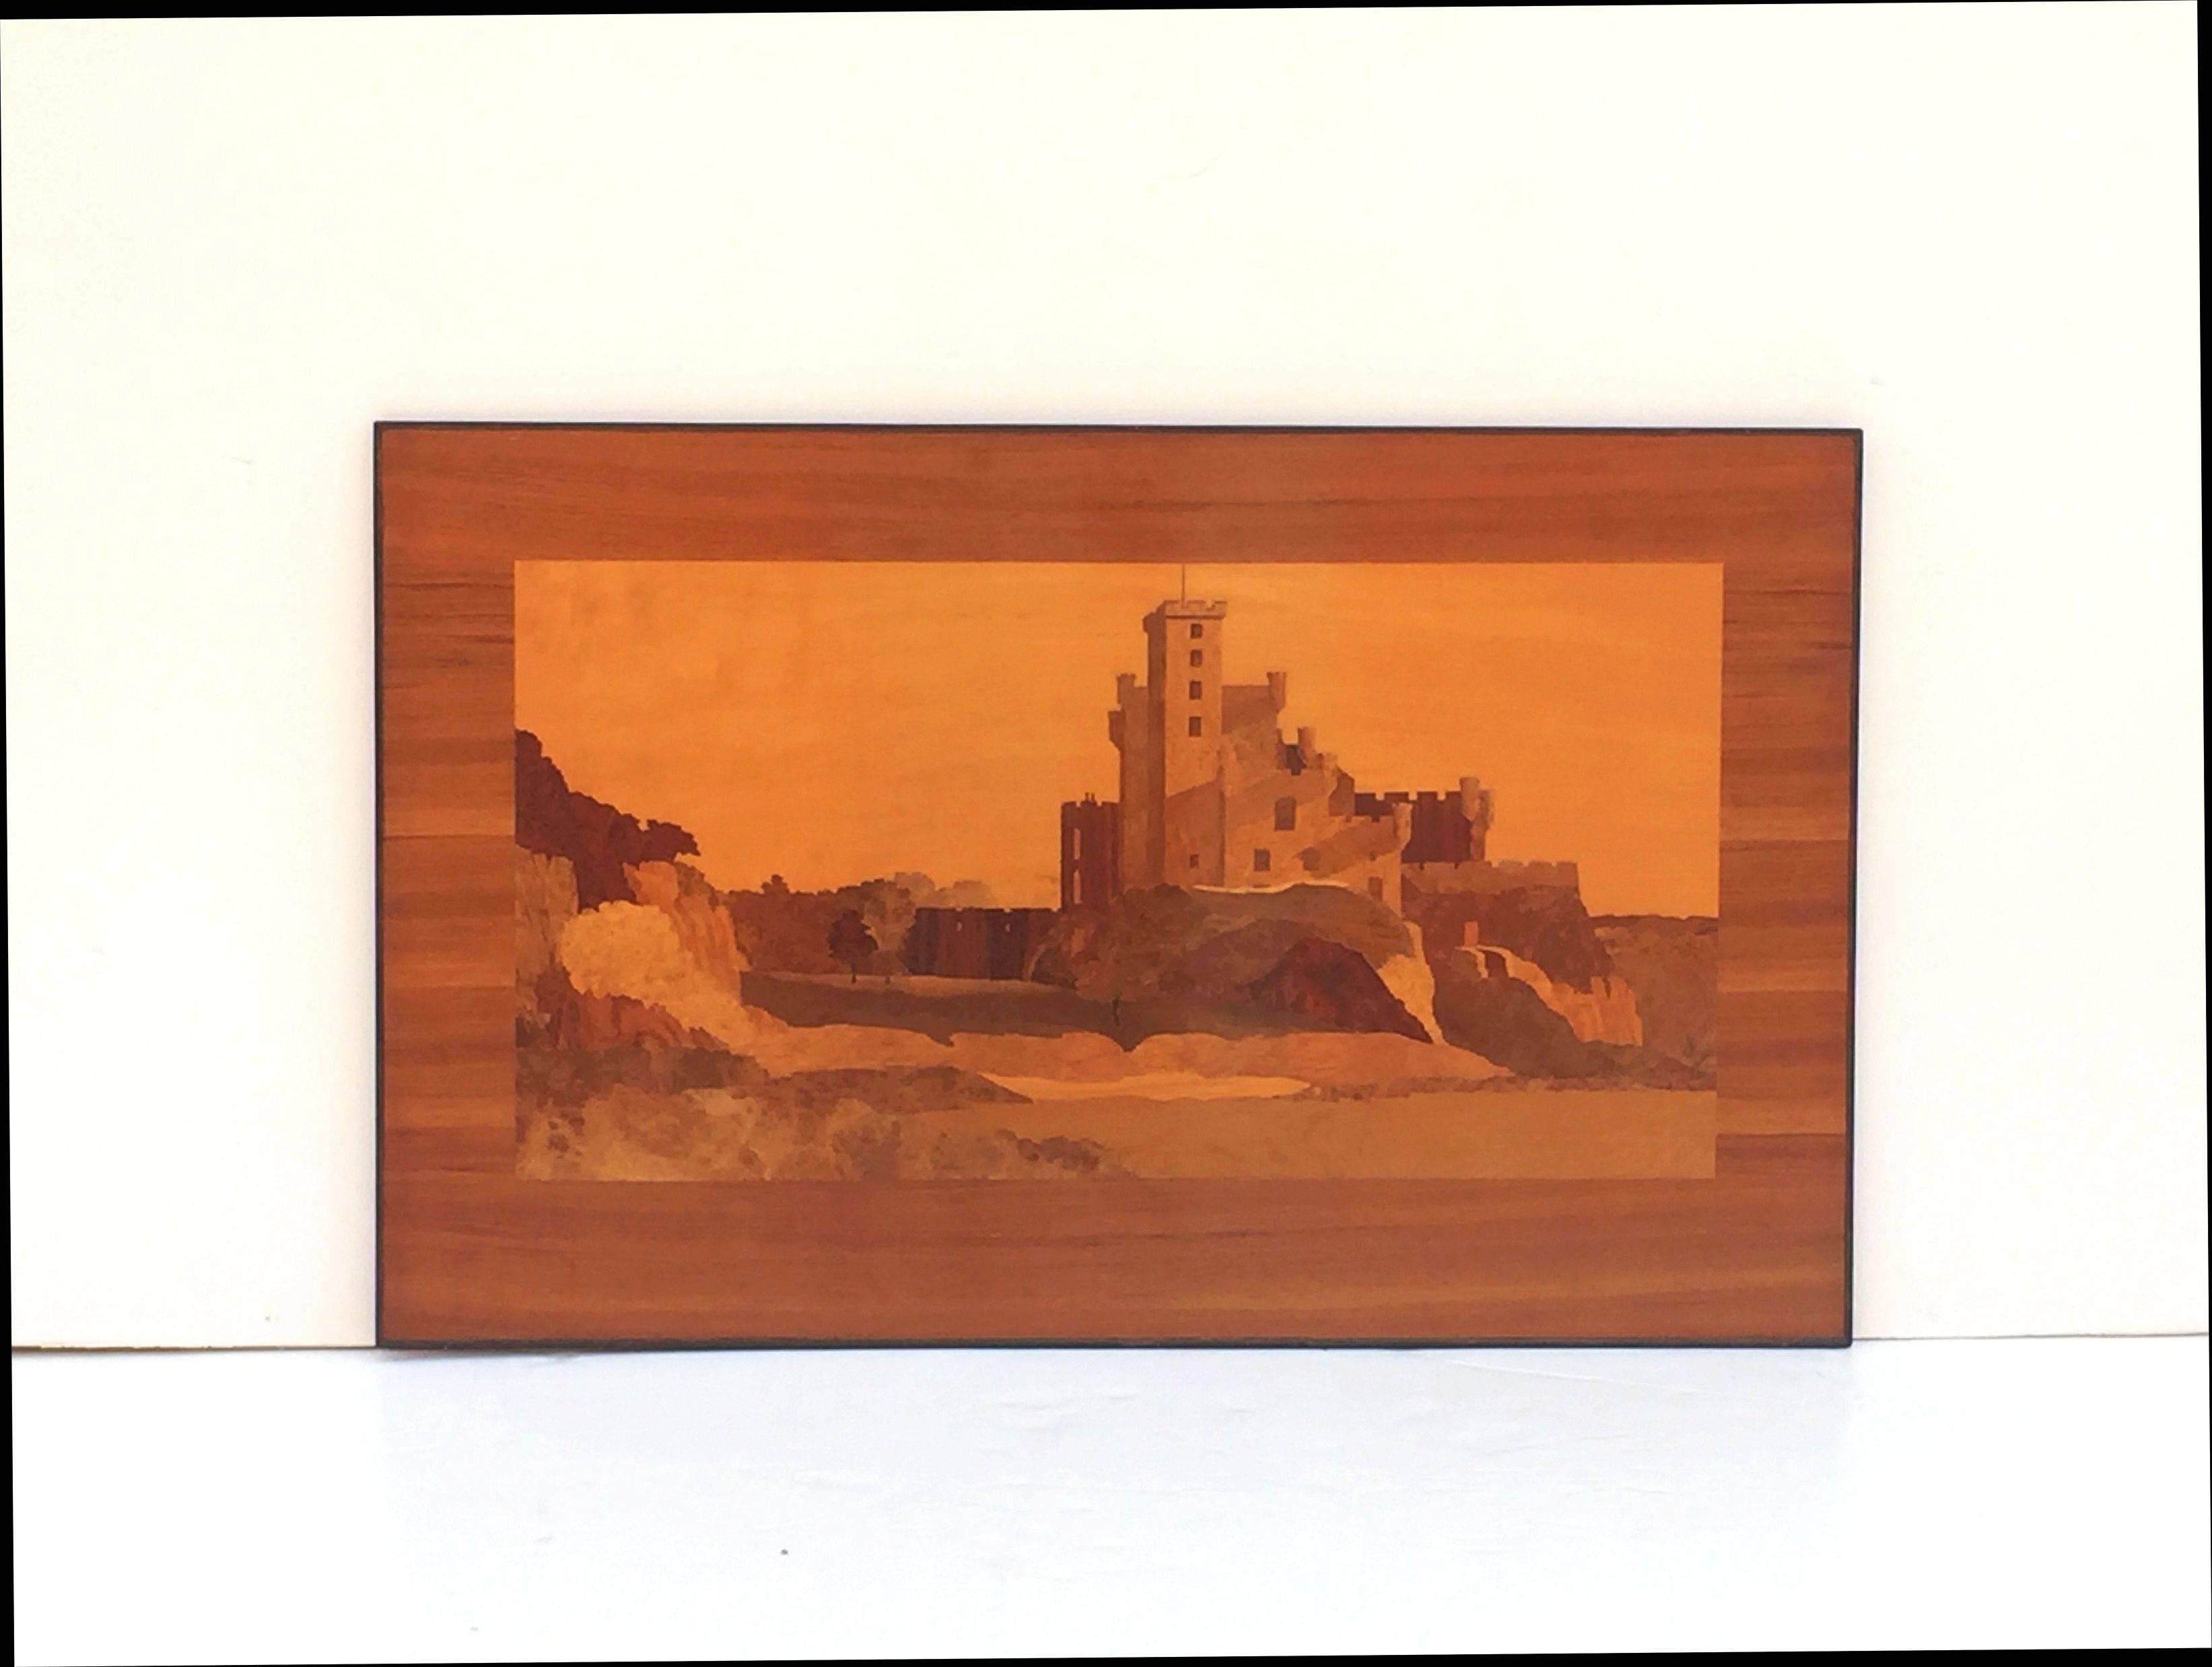 A large Scottish marquetry panel, circa 1920s-1930s, in the manner of Rowley Gallery, inlaid with view of Dunvegan Castle, Isle of Mull, Scotland.

Featuring finely patinated inlaid woods bound in a black metal frame.

Dimensions are: H 31 1/2